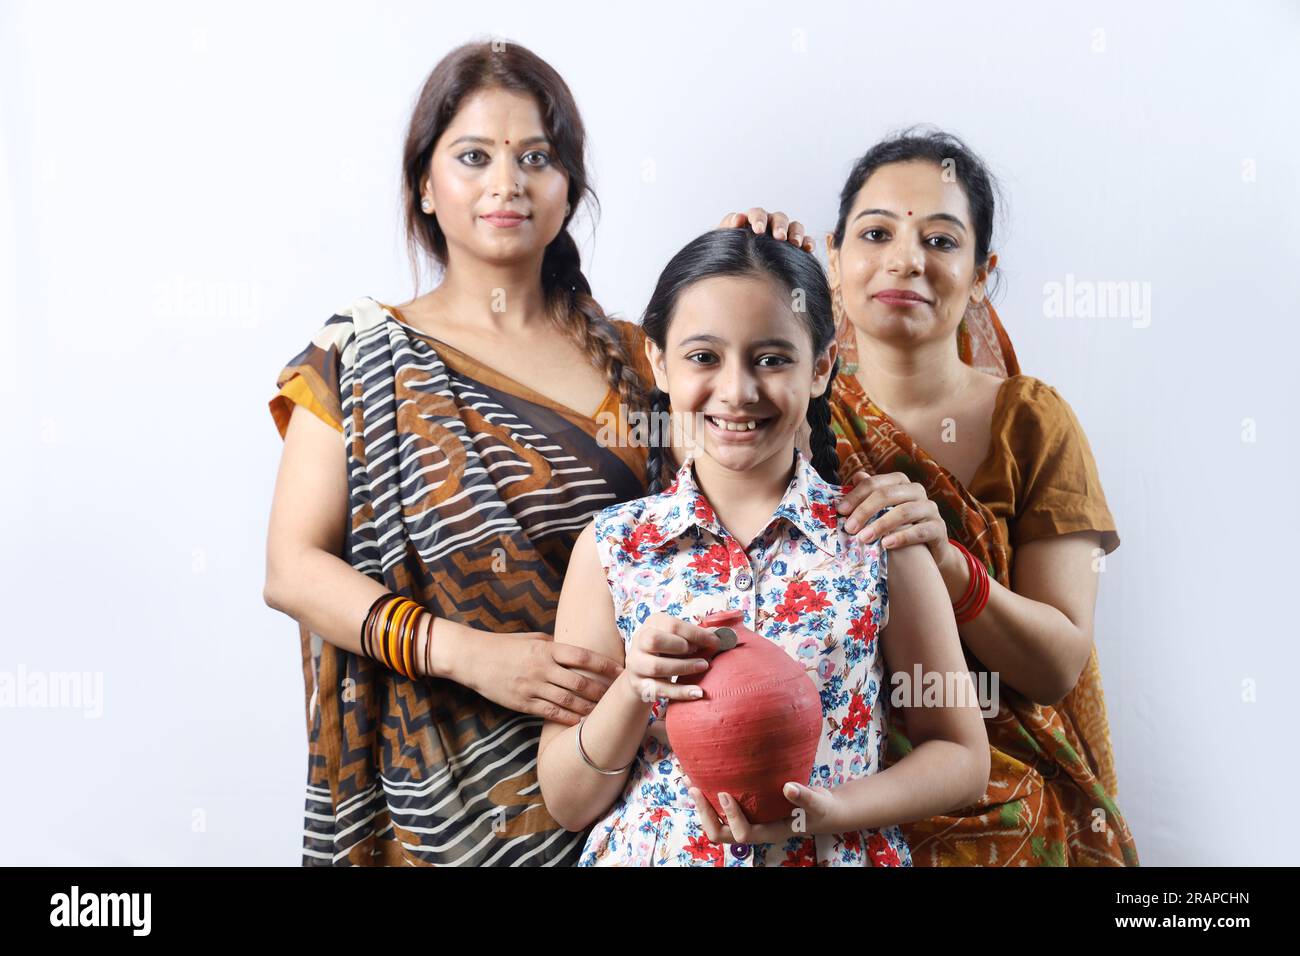 Happy rural Indian villager family of women saving money for future in piggy bank. Aspirational lady showing saving money concept. Stock Photo